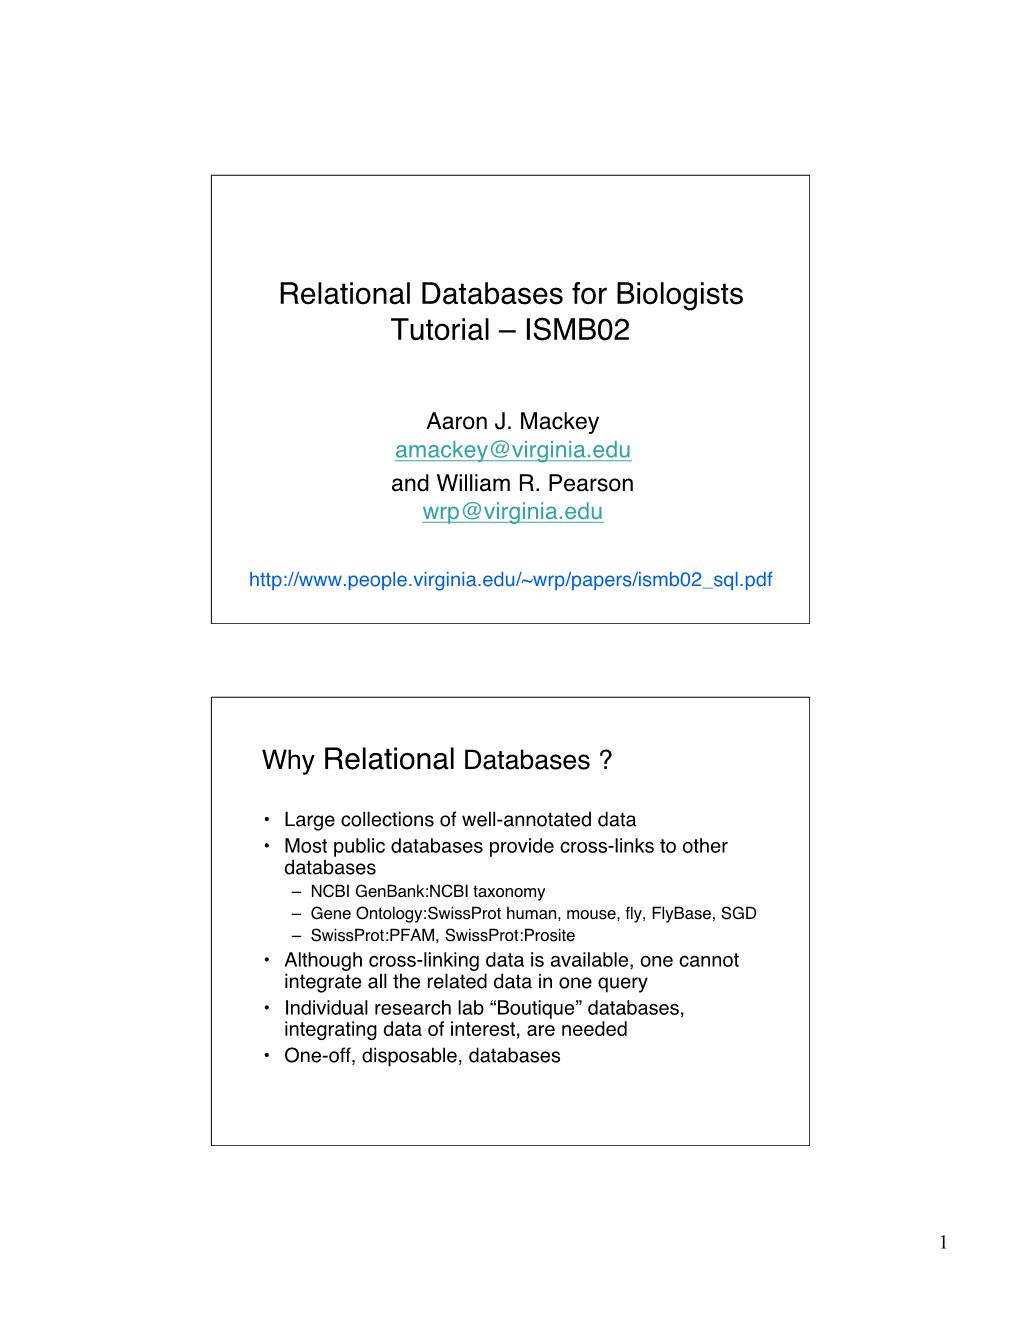 ISMB02 Why Relational Databases